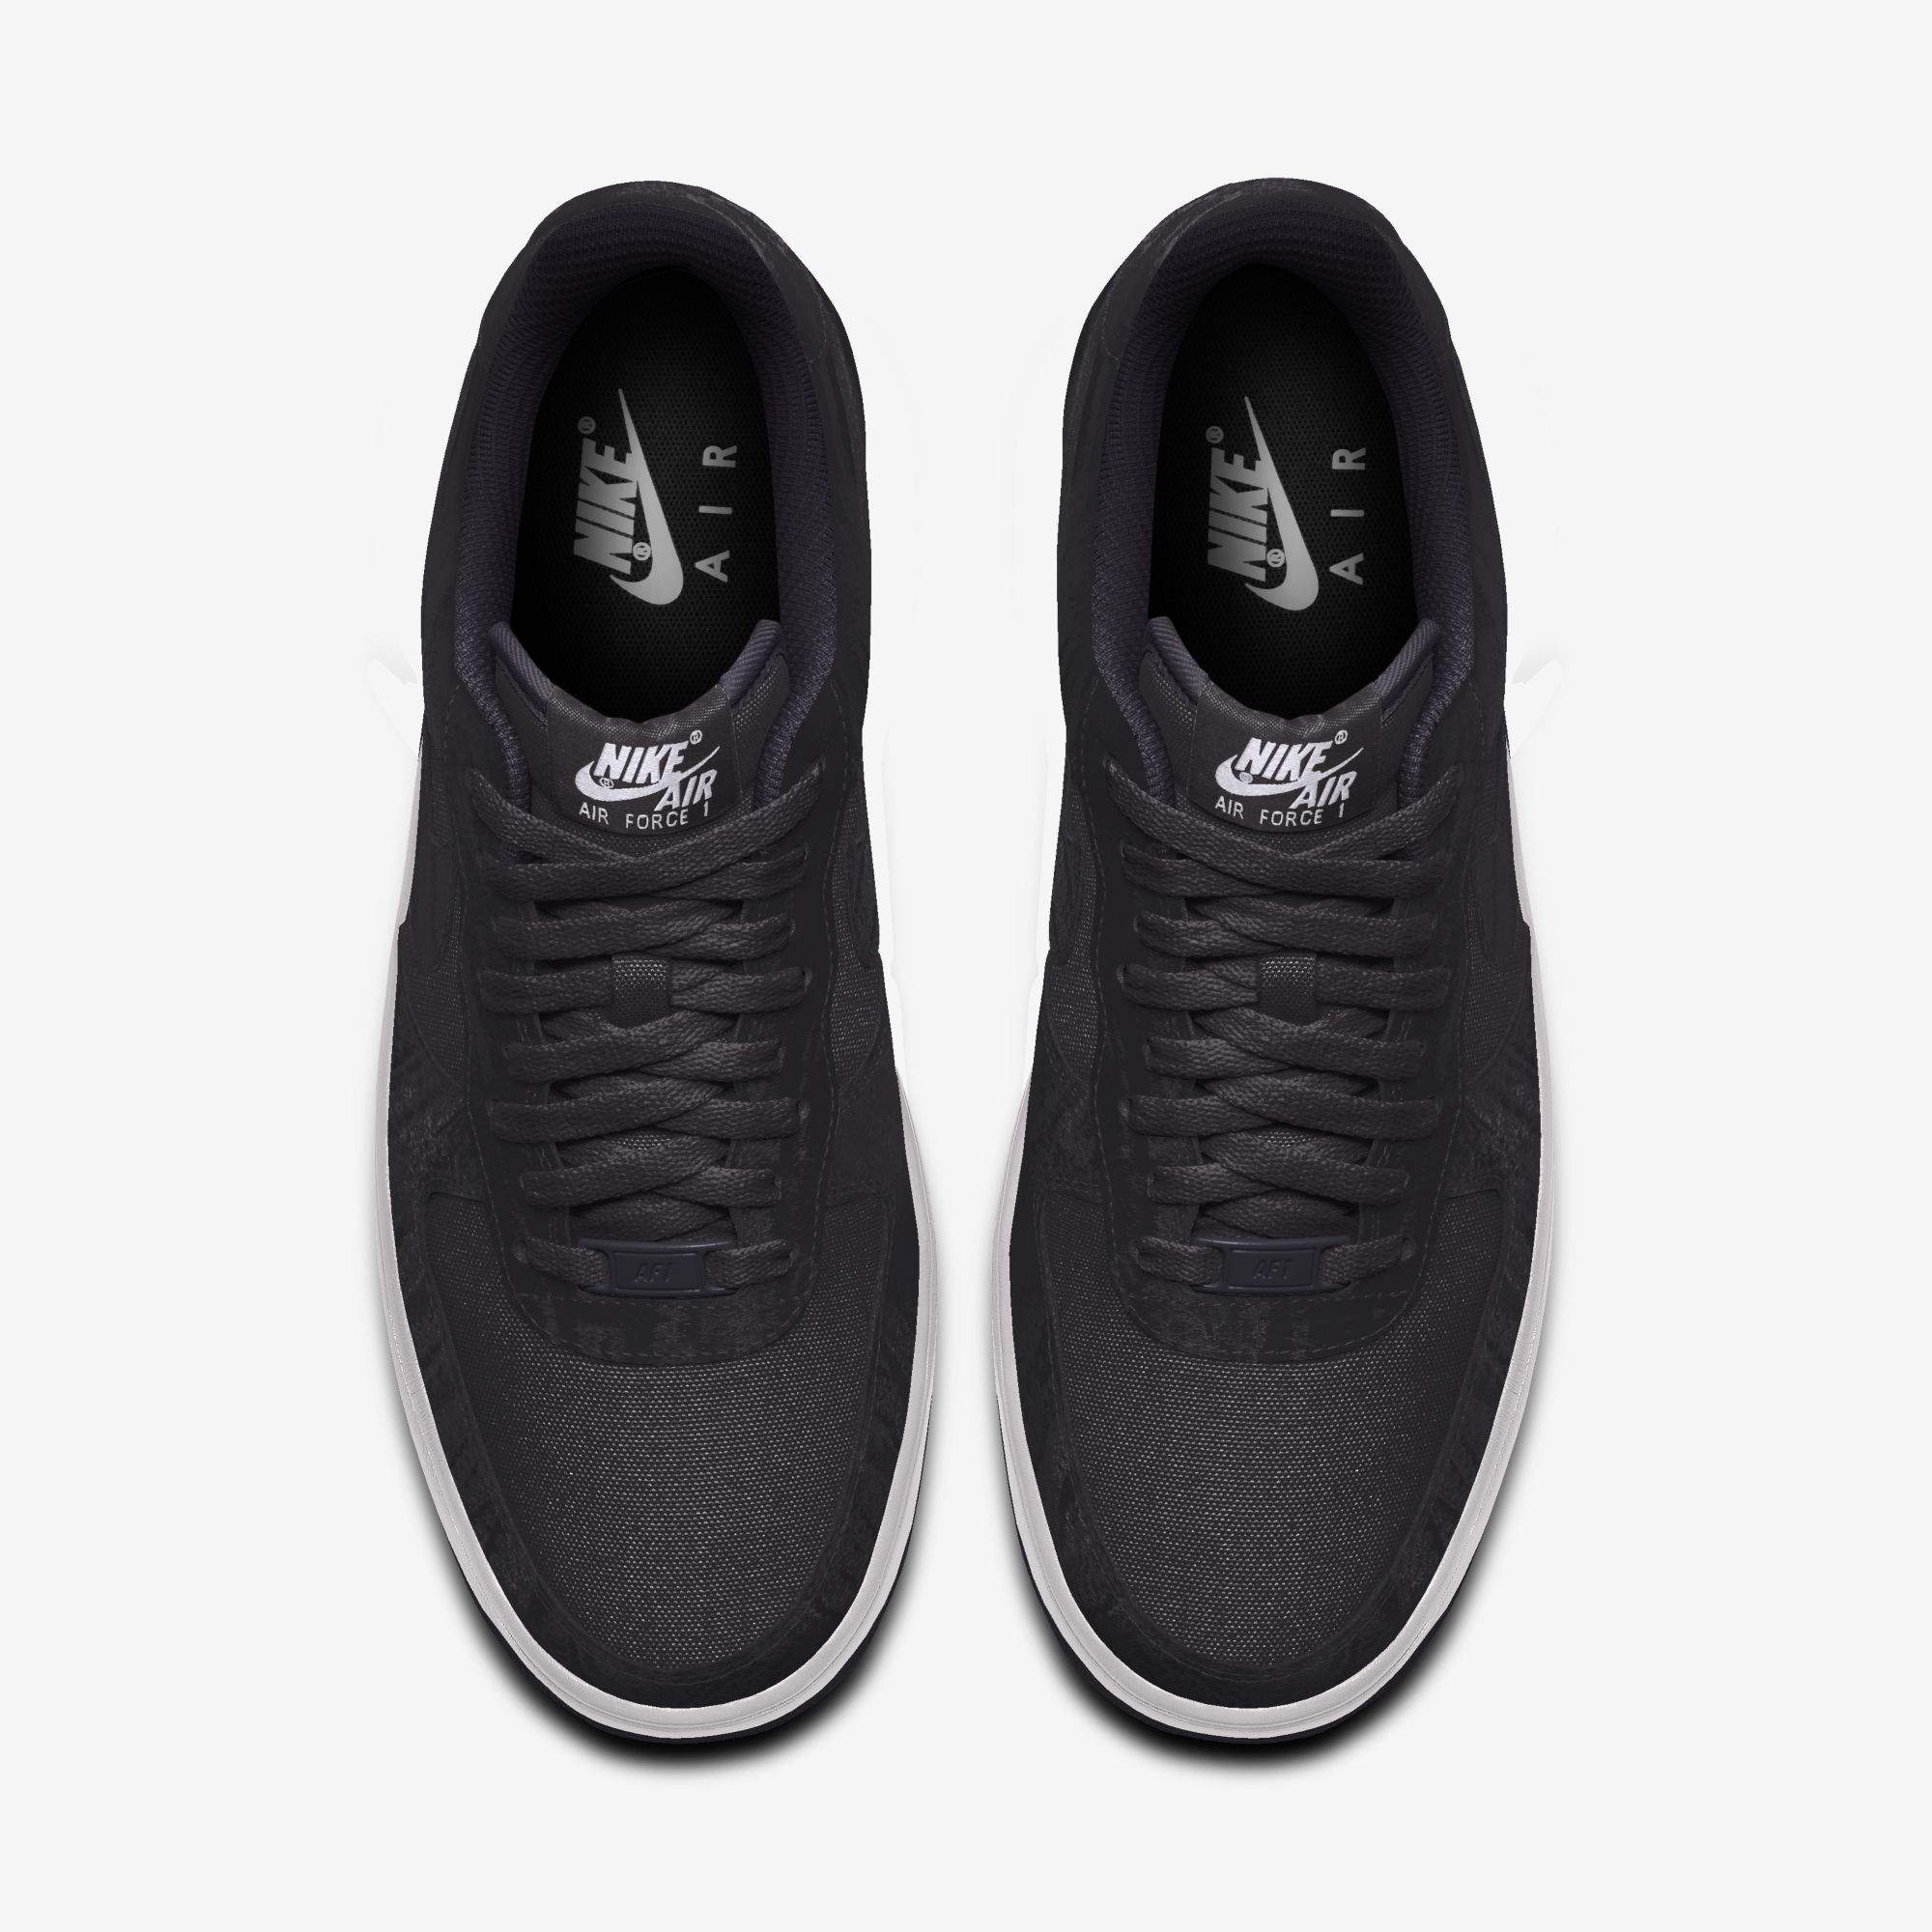  Nike Air Force 1 Low By You - Black Satin / Black Canvas 